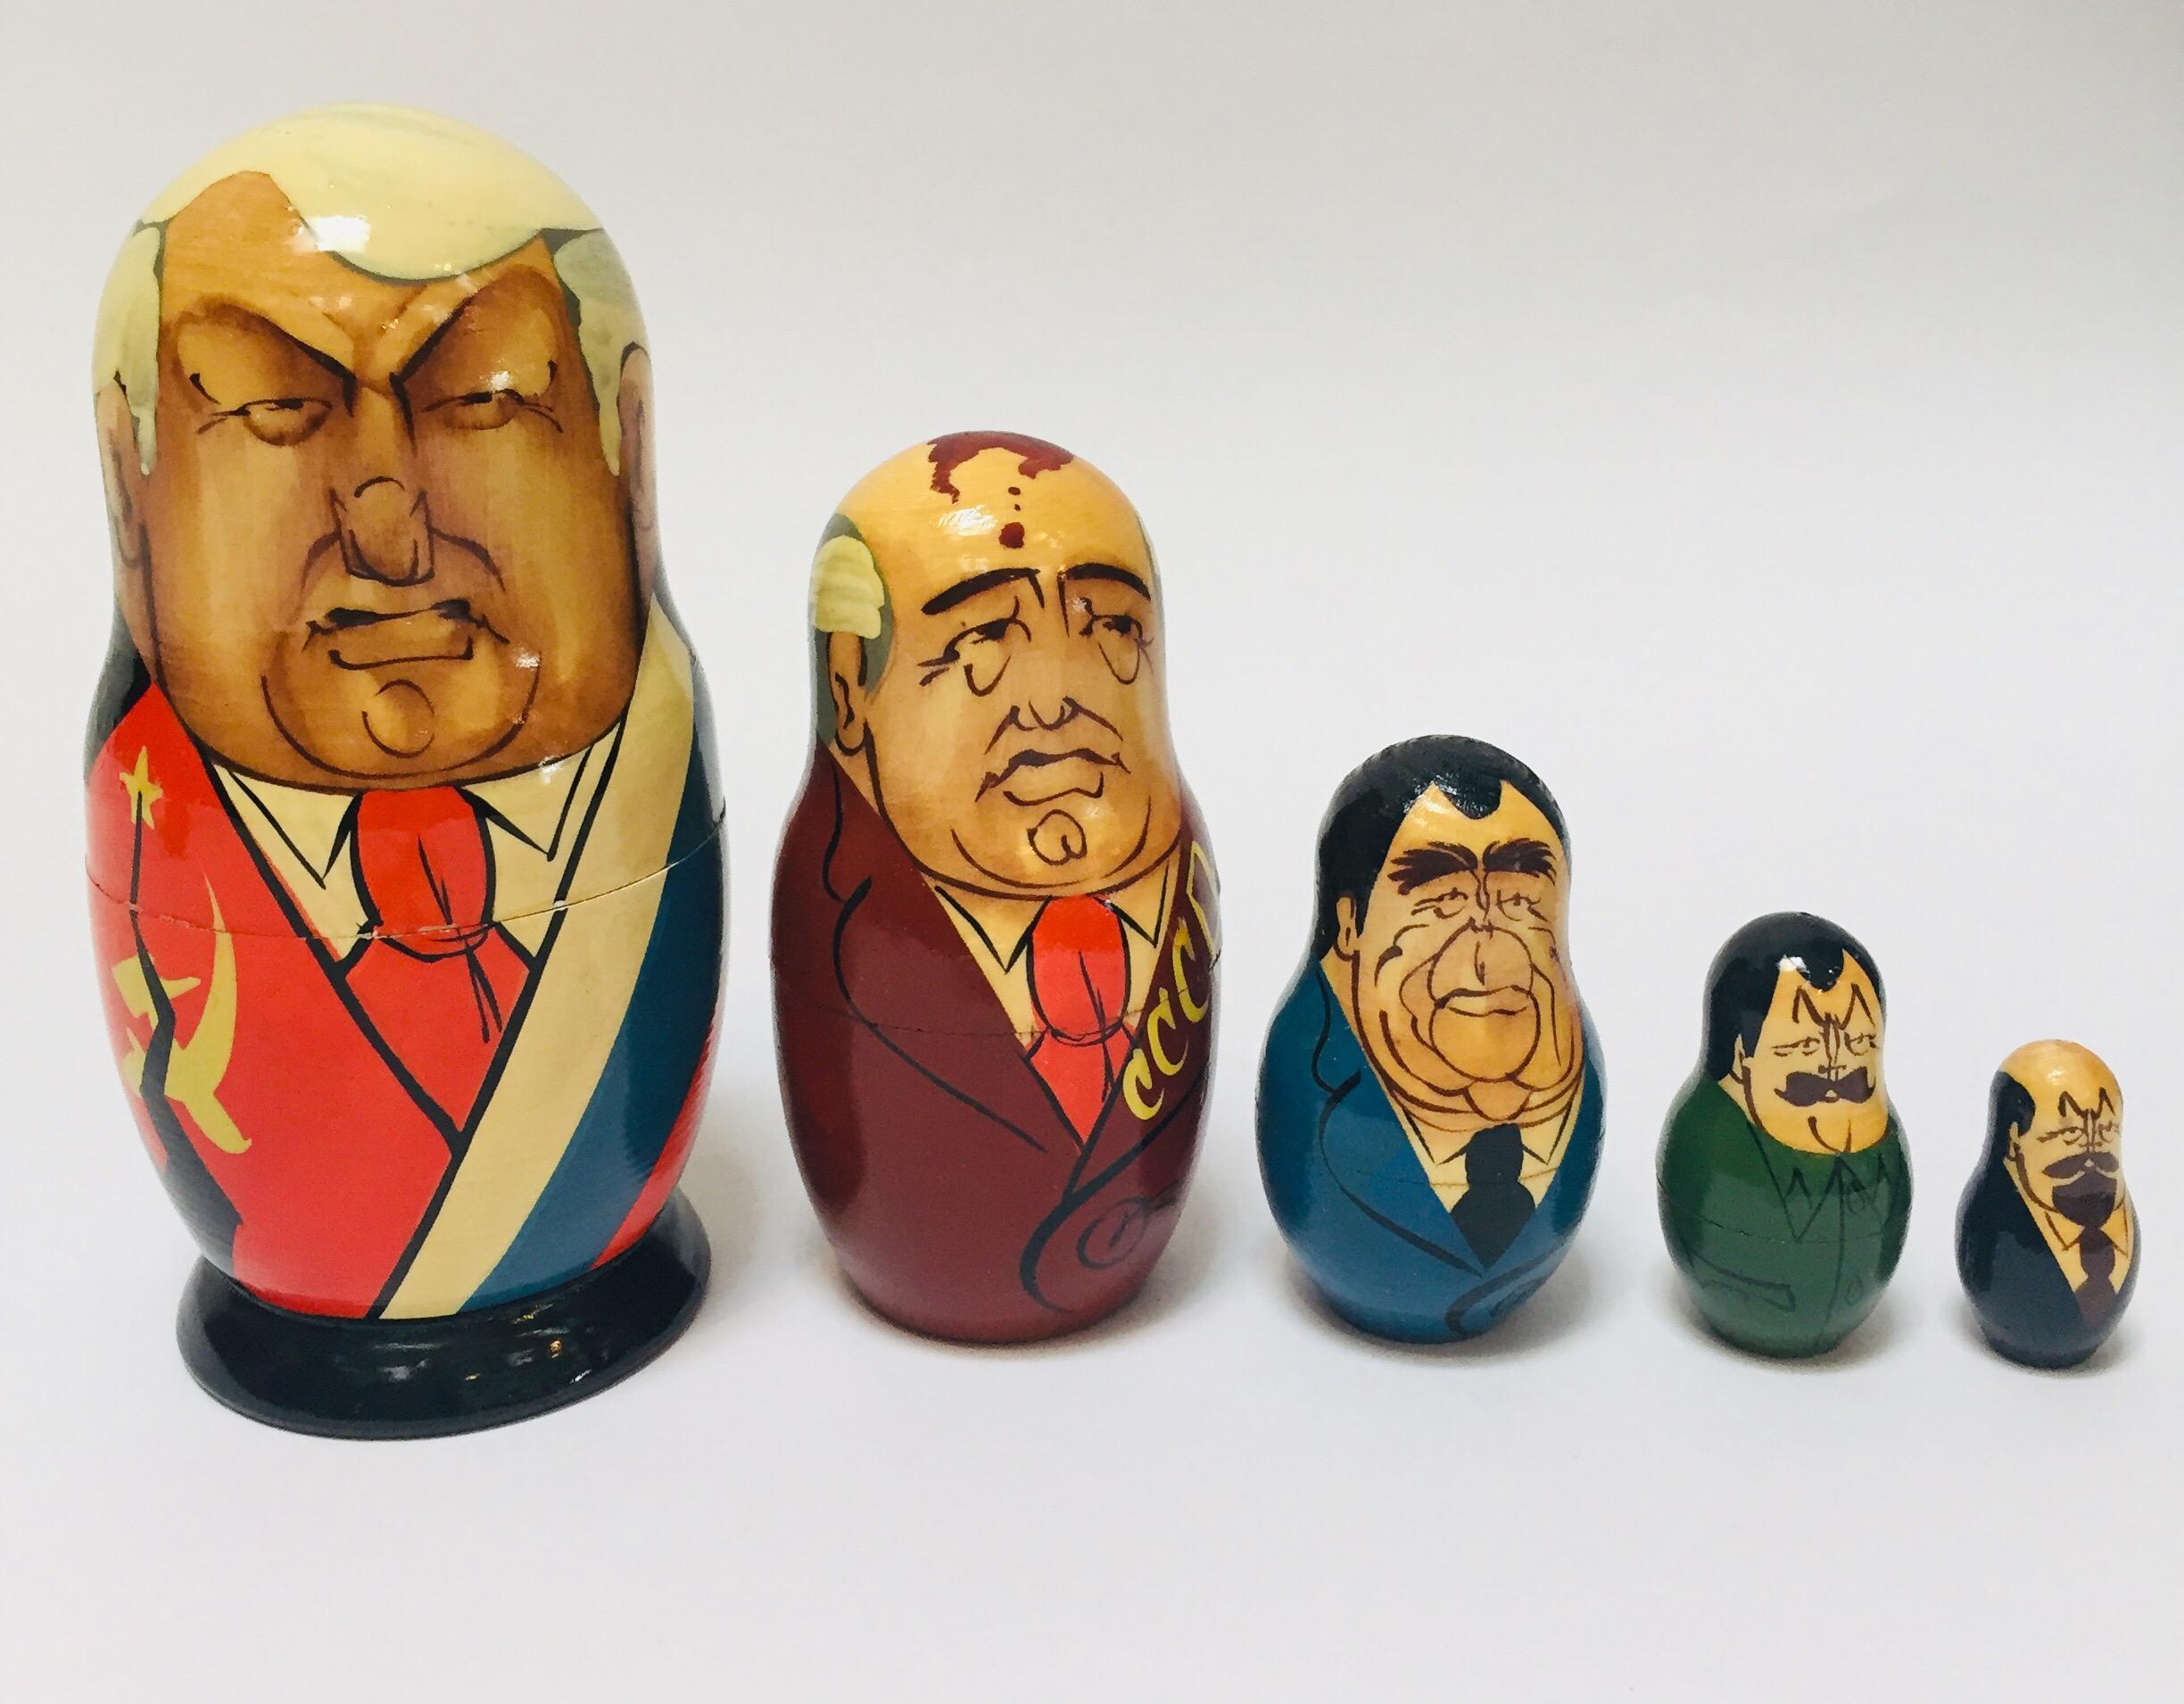 Matryoshka of soviet politicians, soviet era, USSR, circa 1990s.
Vintage hand painted Matryoshka from the end of soviet Eera in USSR. This Matryoshka doll is made of beech wood with hand painted politician figures of the Soviet era. The biggest is